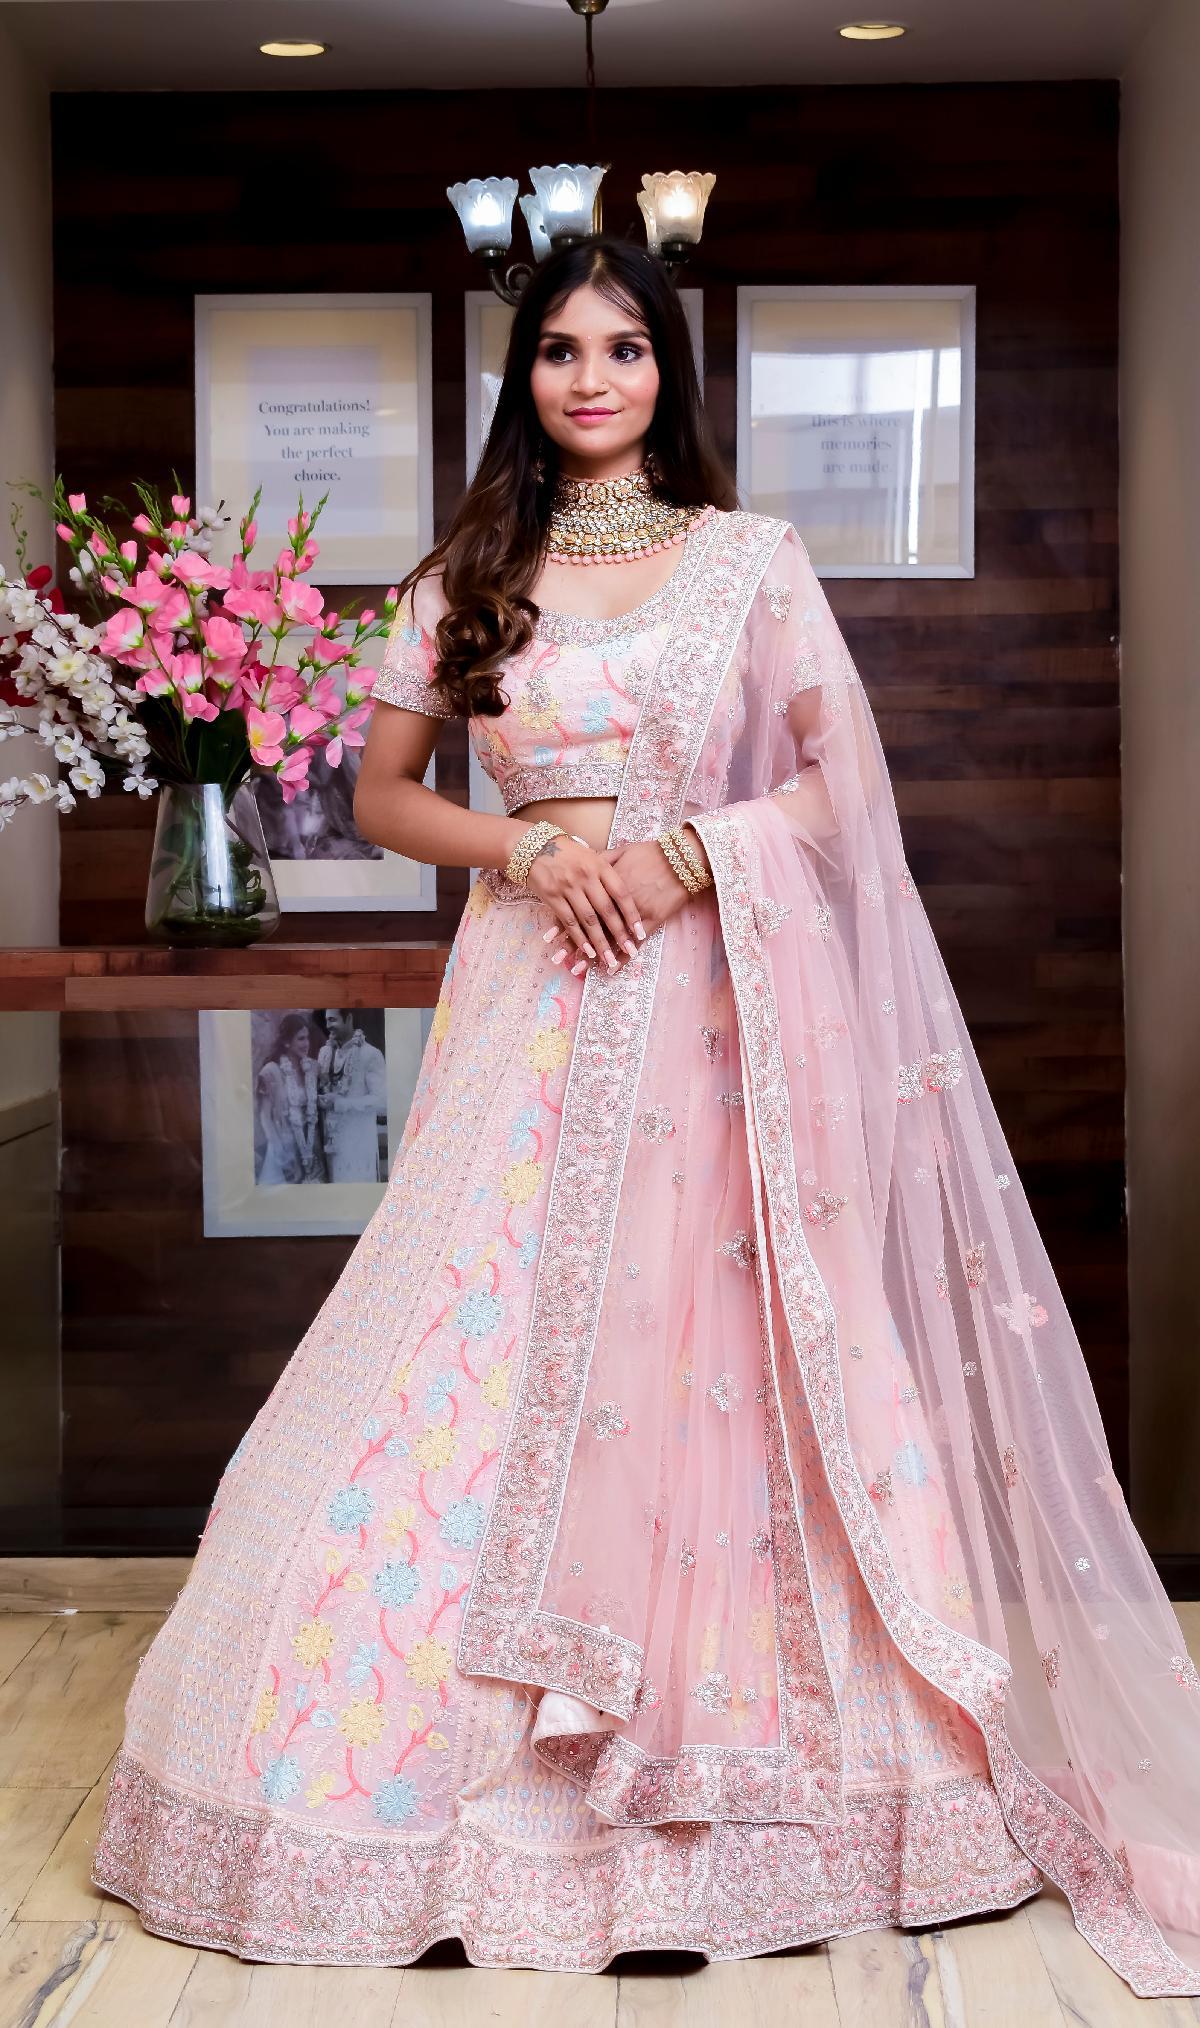 Photo of Light pink girly engagement lehenga with stone work | Indian  wedding gowns, Indian bridal dress, Indian bridal lehenga